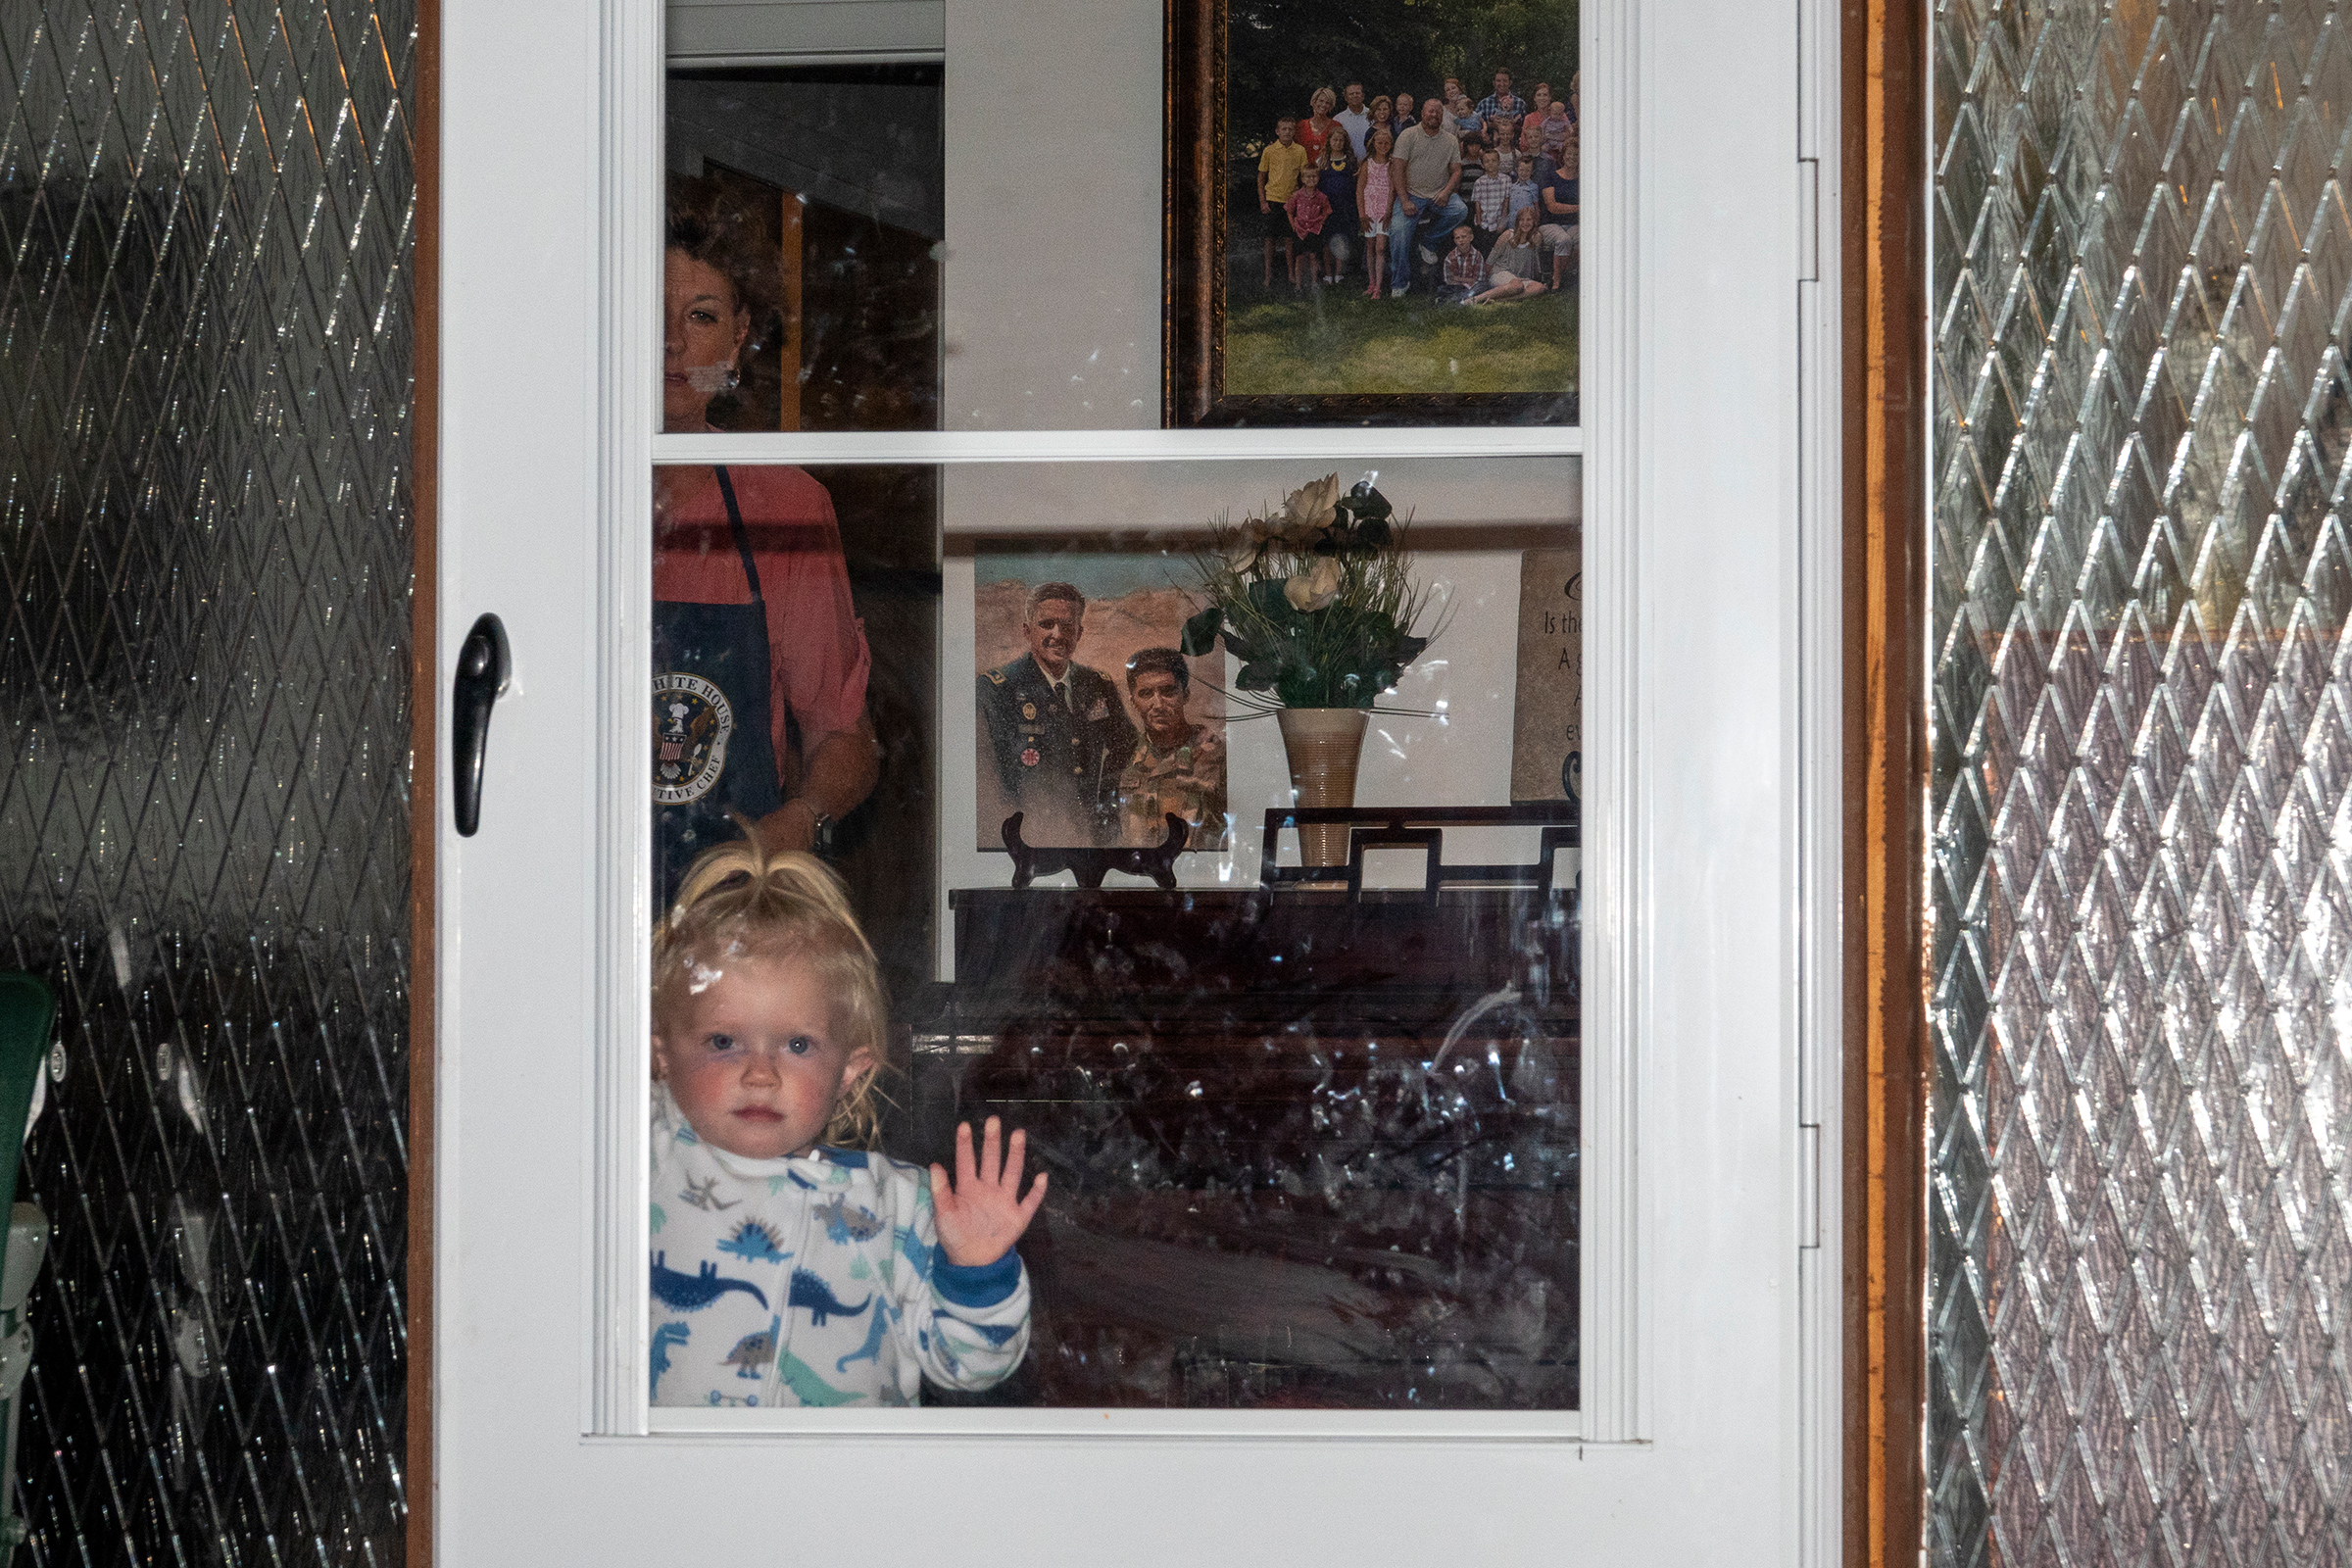 Caroline Taylor at her grandmother's house in North Ogden, Utah, in September. Her father, Brent Taylor, was killed while serving in Afghanistan in November 2018. Oct. 21 issue. (Peter van Agtmael—Magnum Photos for TIME)